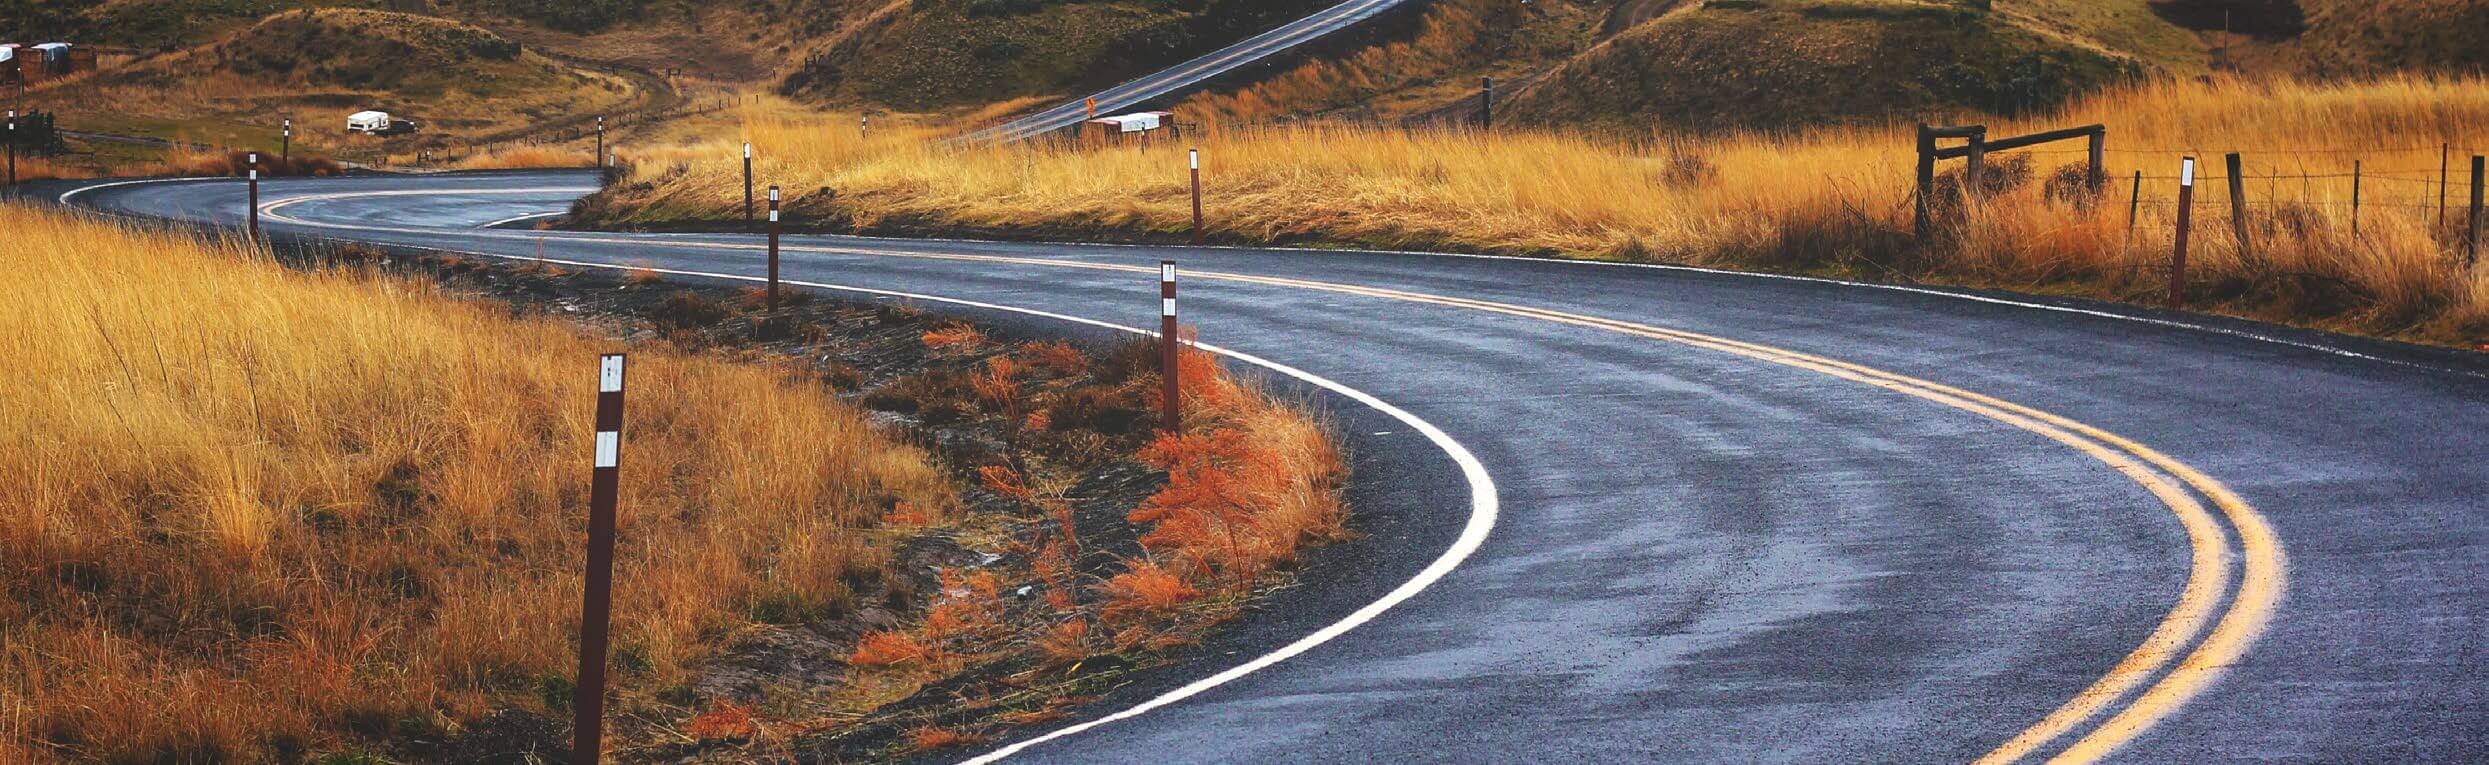 Photo of a winding road